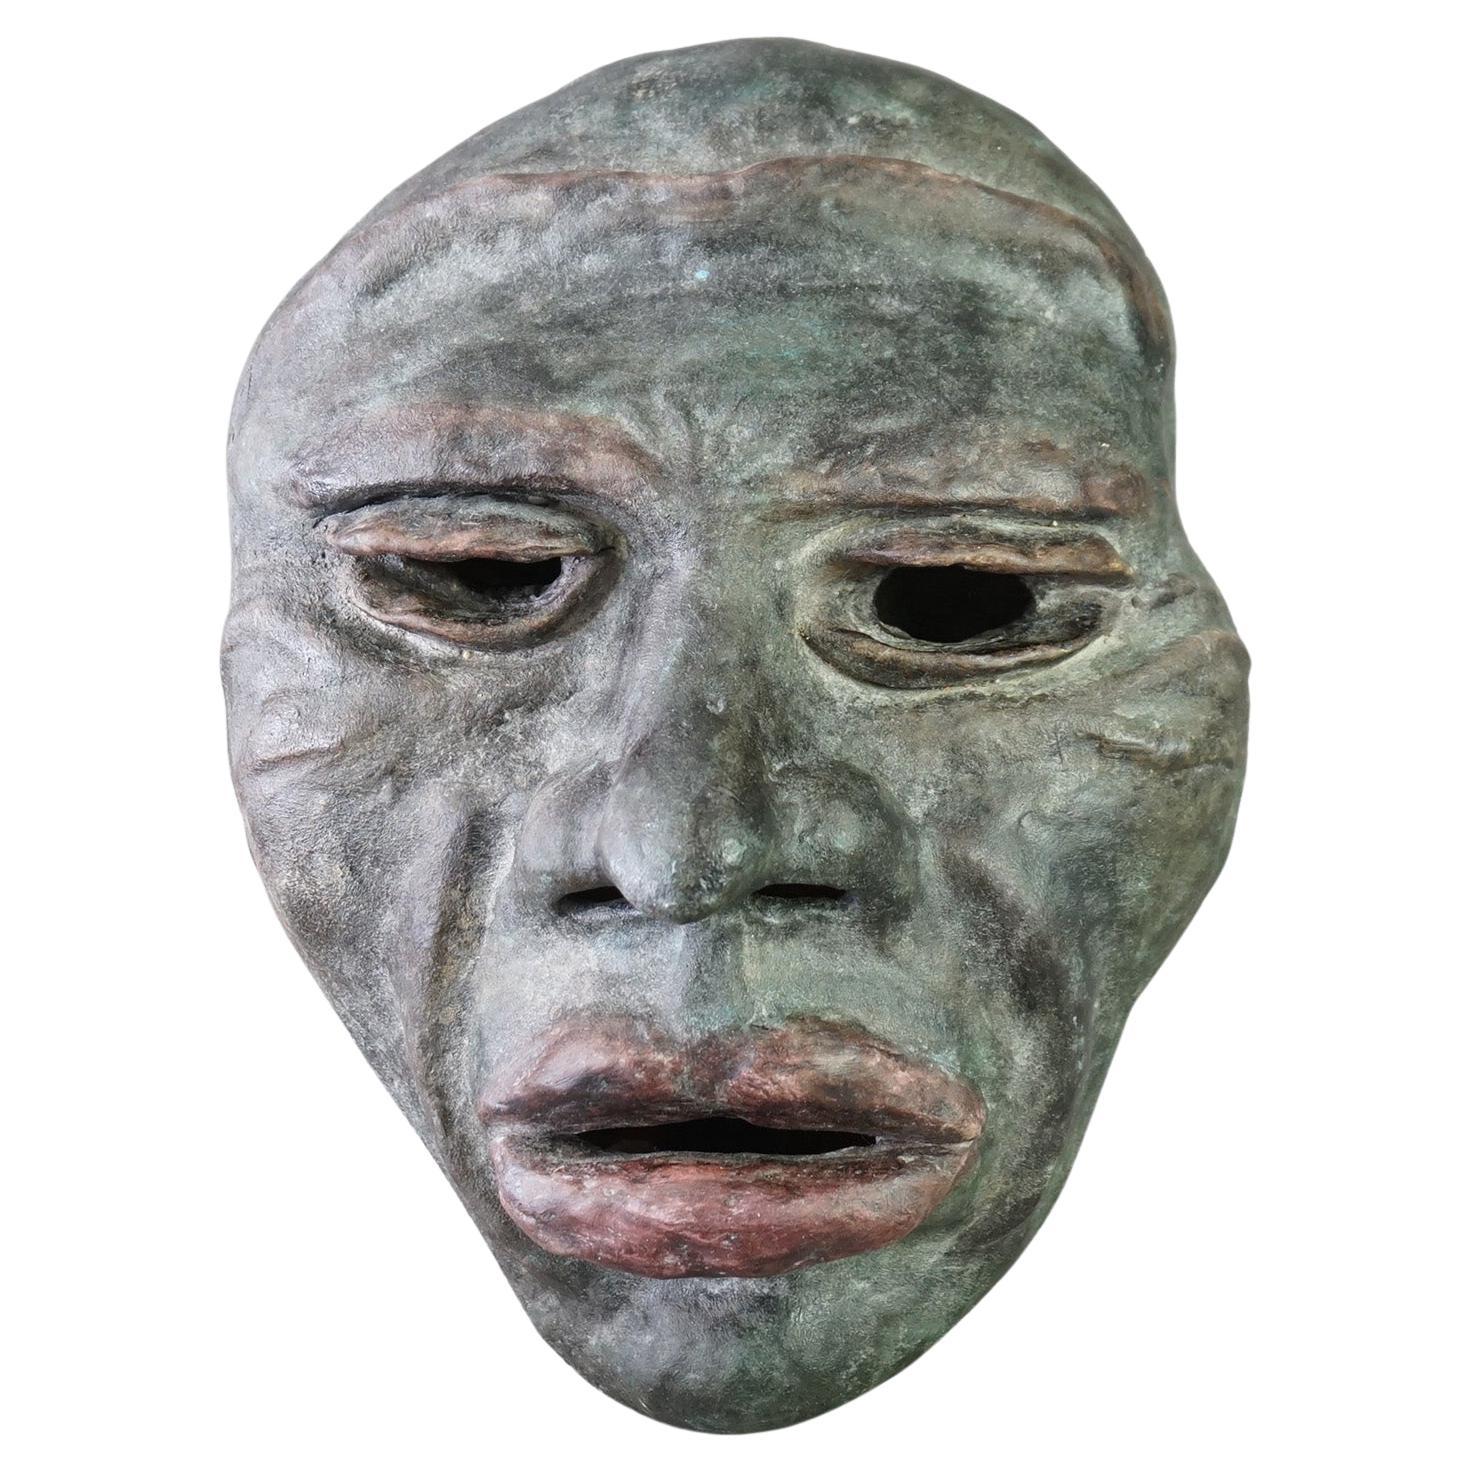 A Mid Century Modern wall sculpture by York offers terra cotta construction and depicts the face of a tribal man, artist signed, c1997

Measures - 14.75